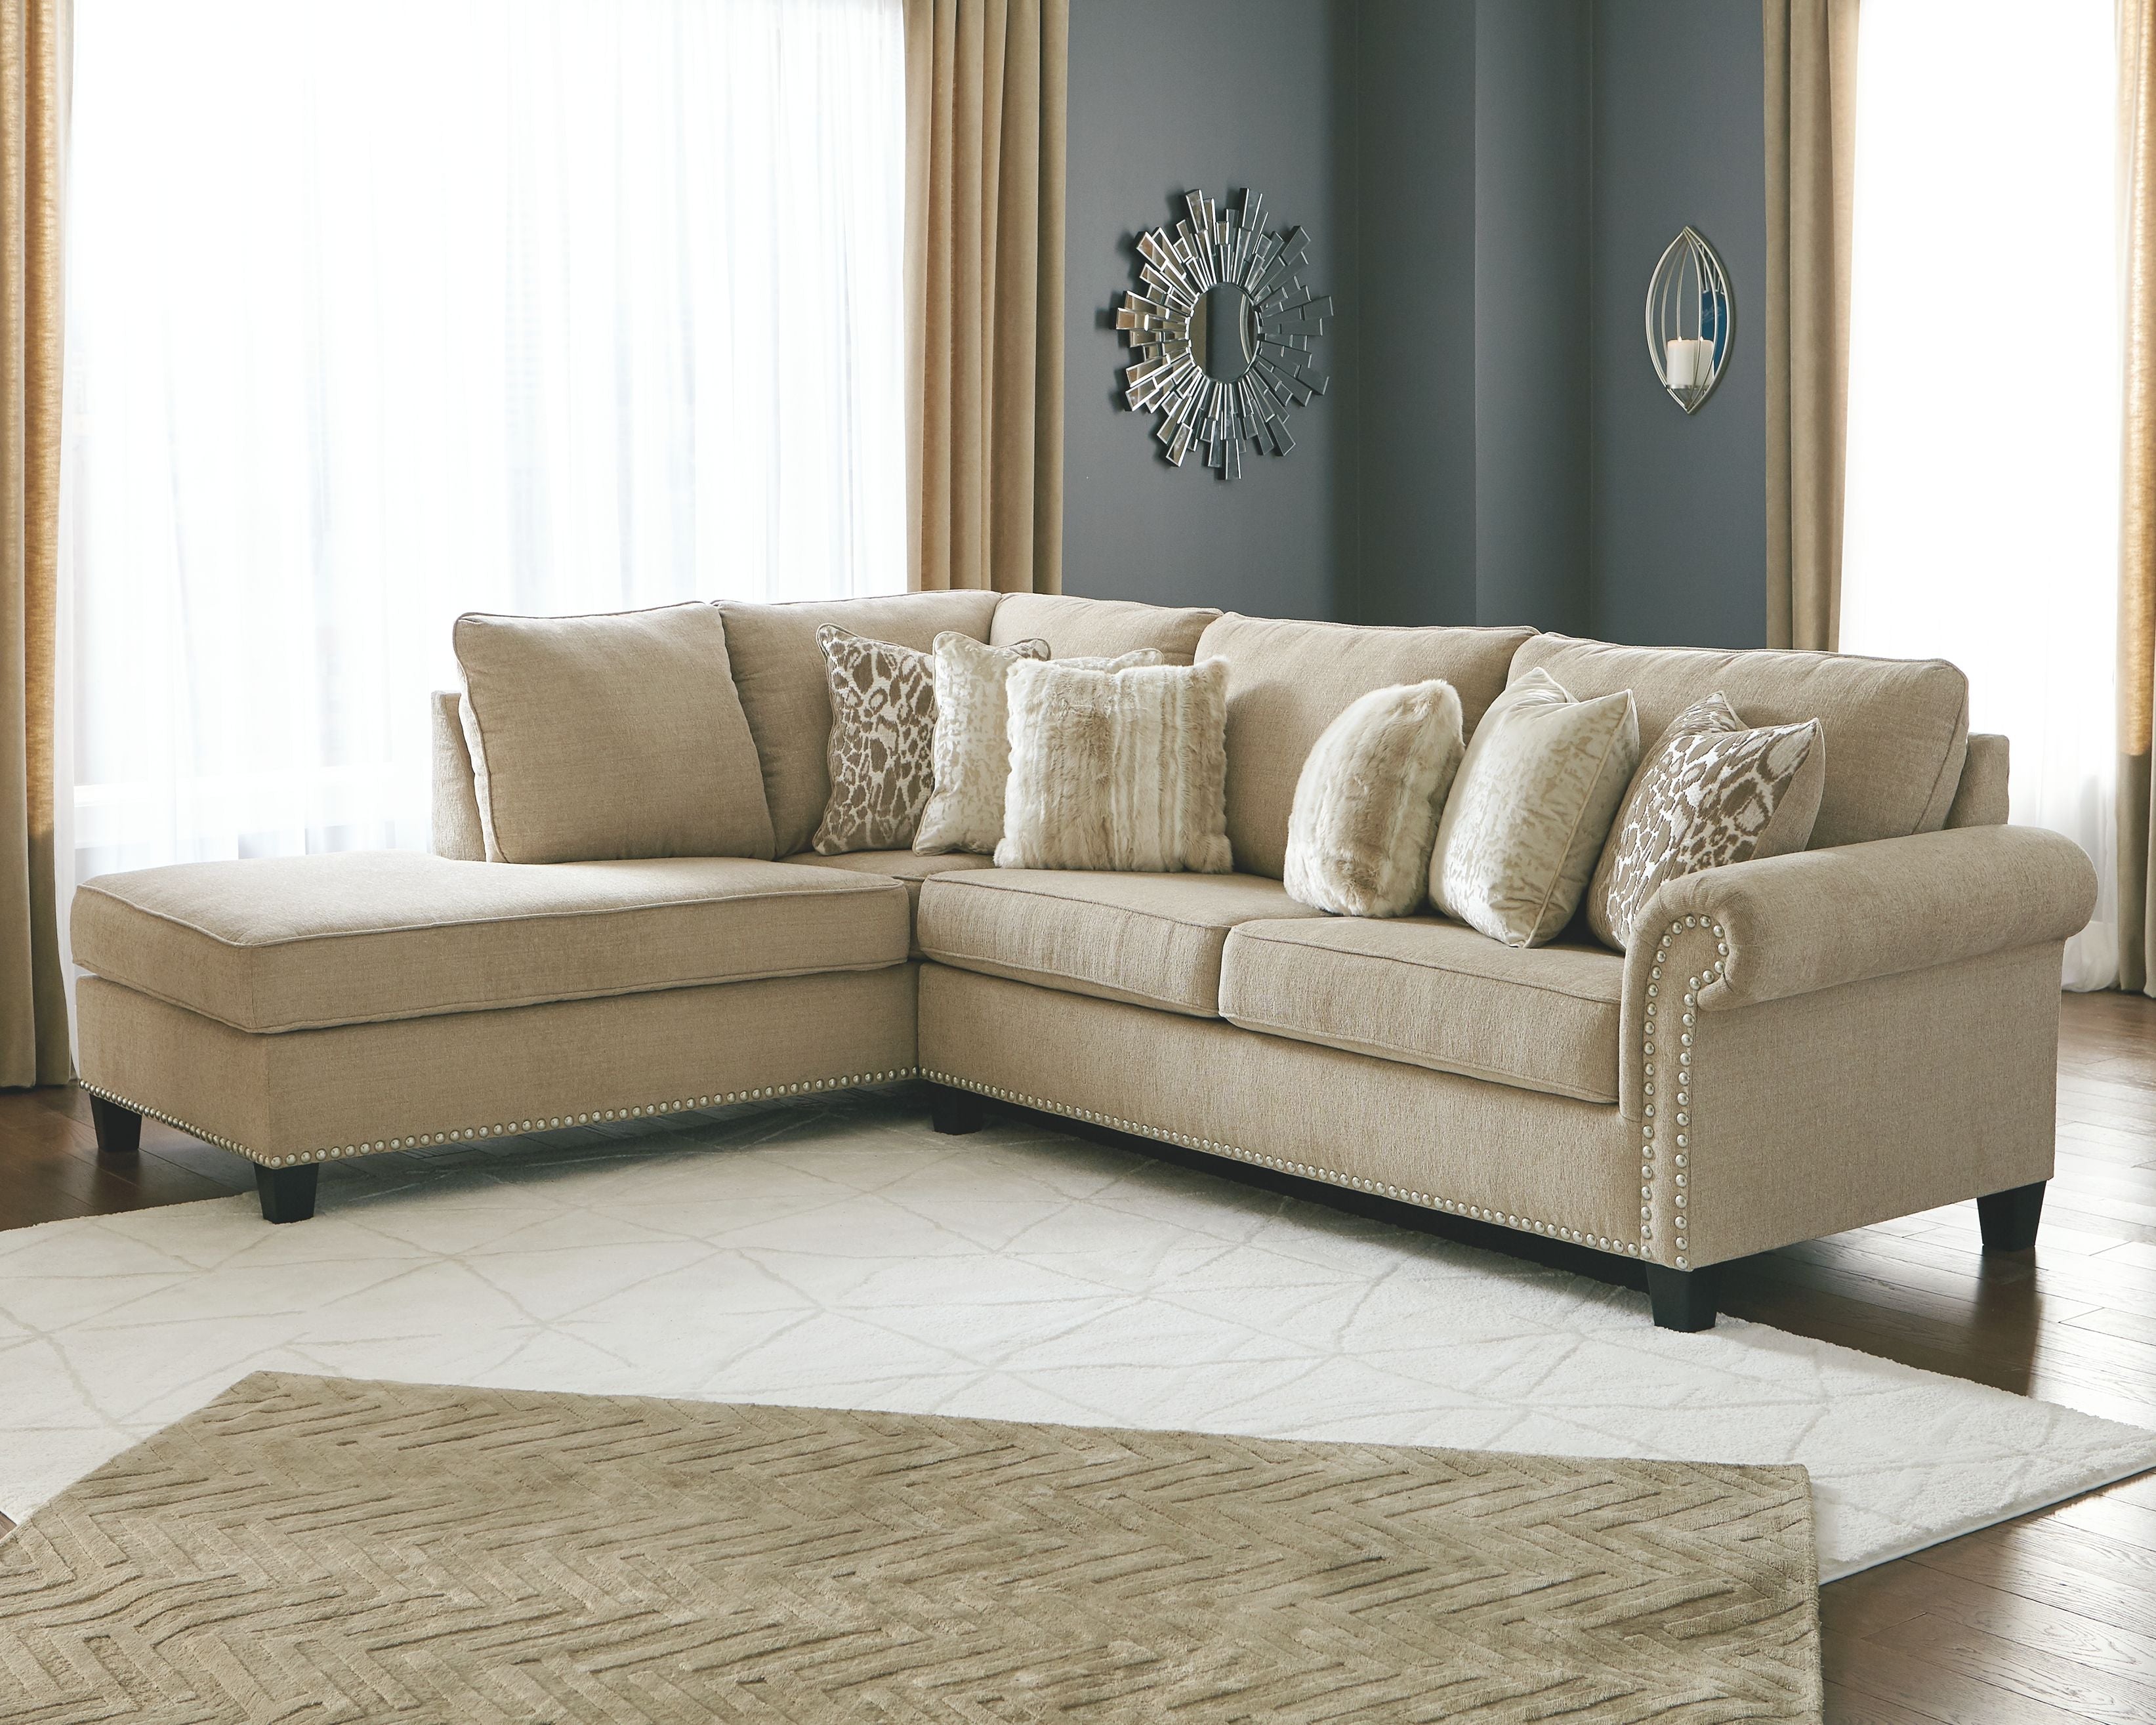 Dovemont Sectional Sofa w/ Nailhead Trim-Stationary Sectionals-American Furniture Outlet